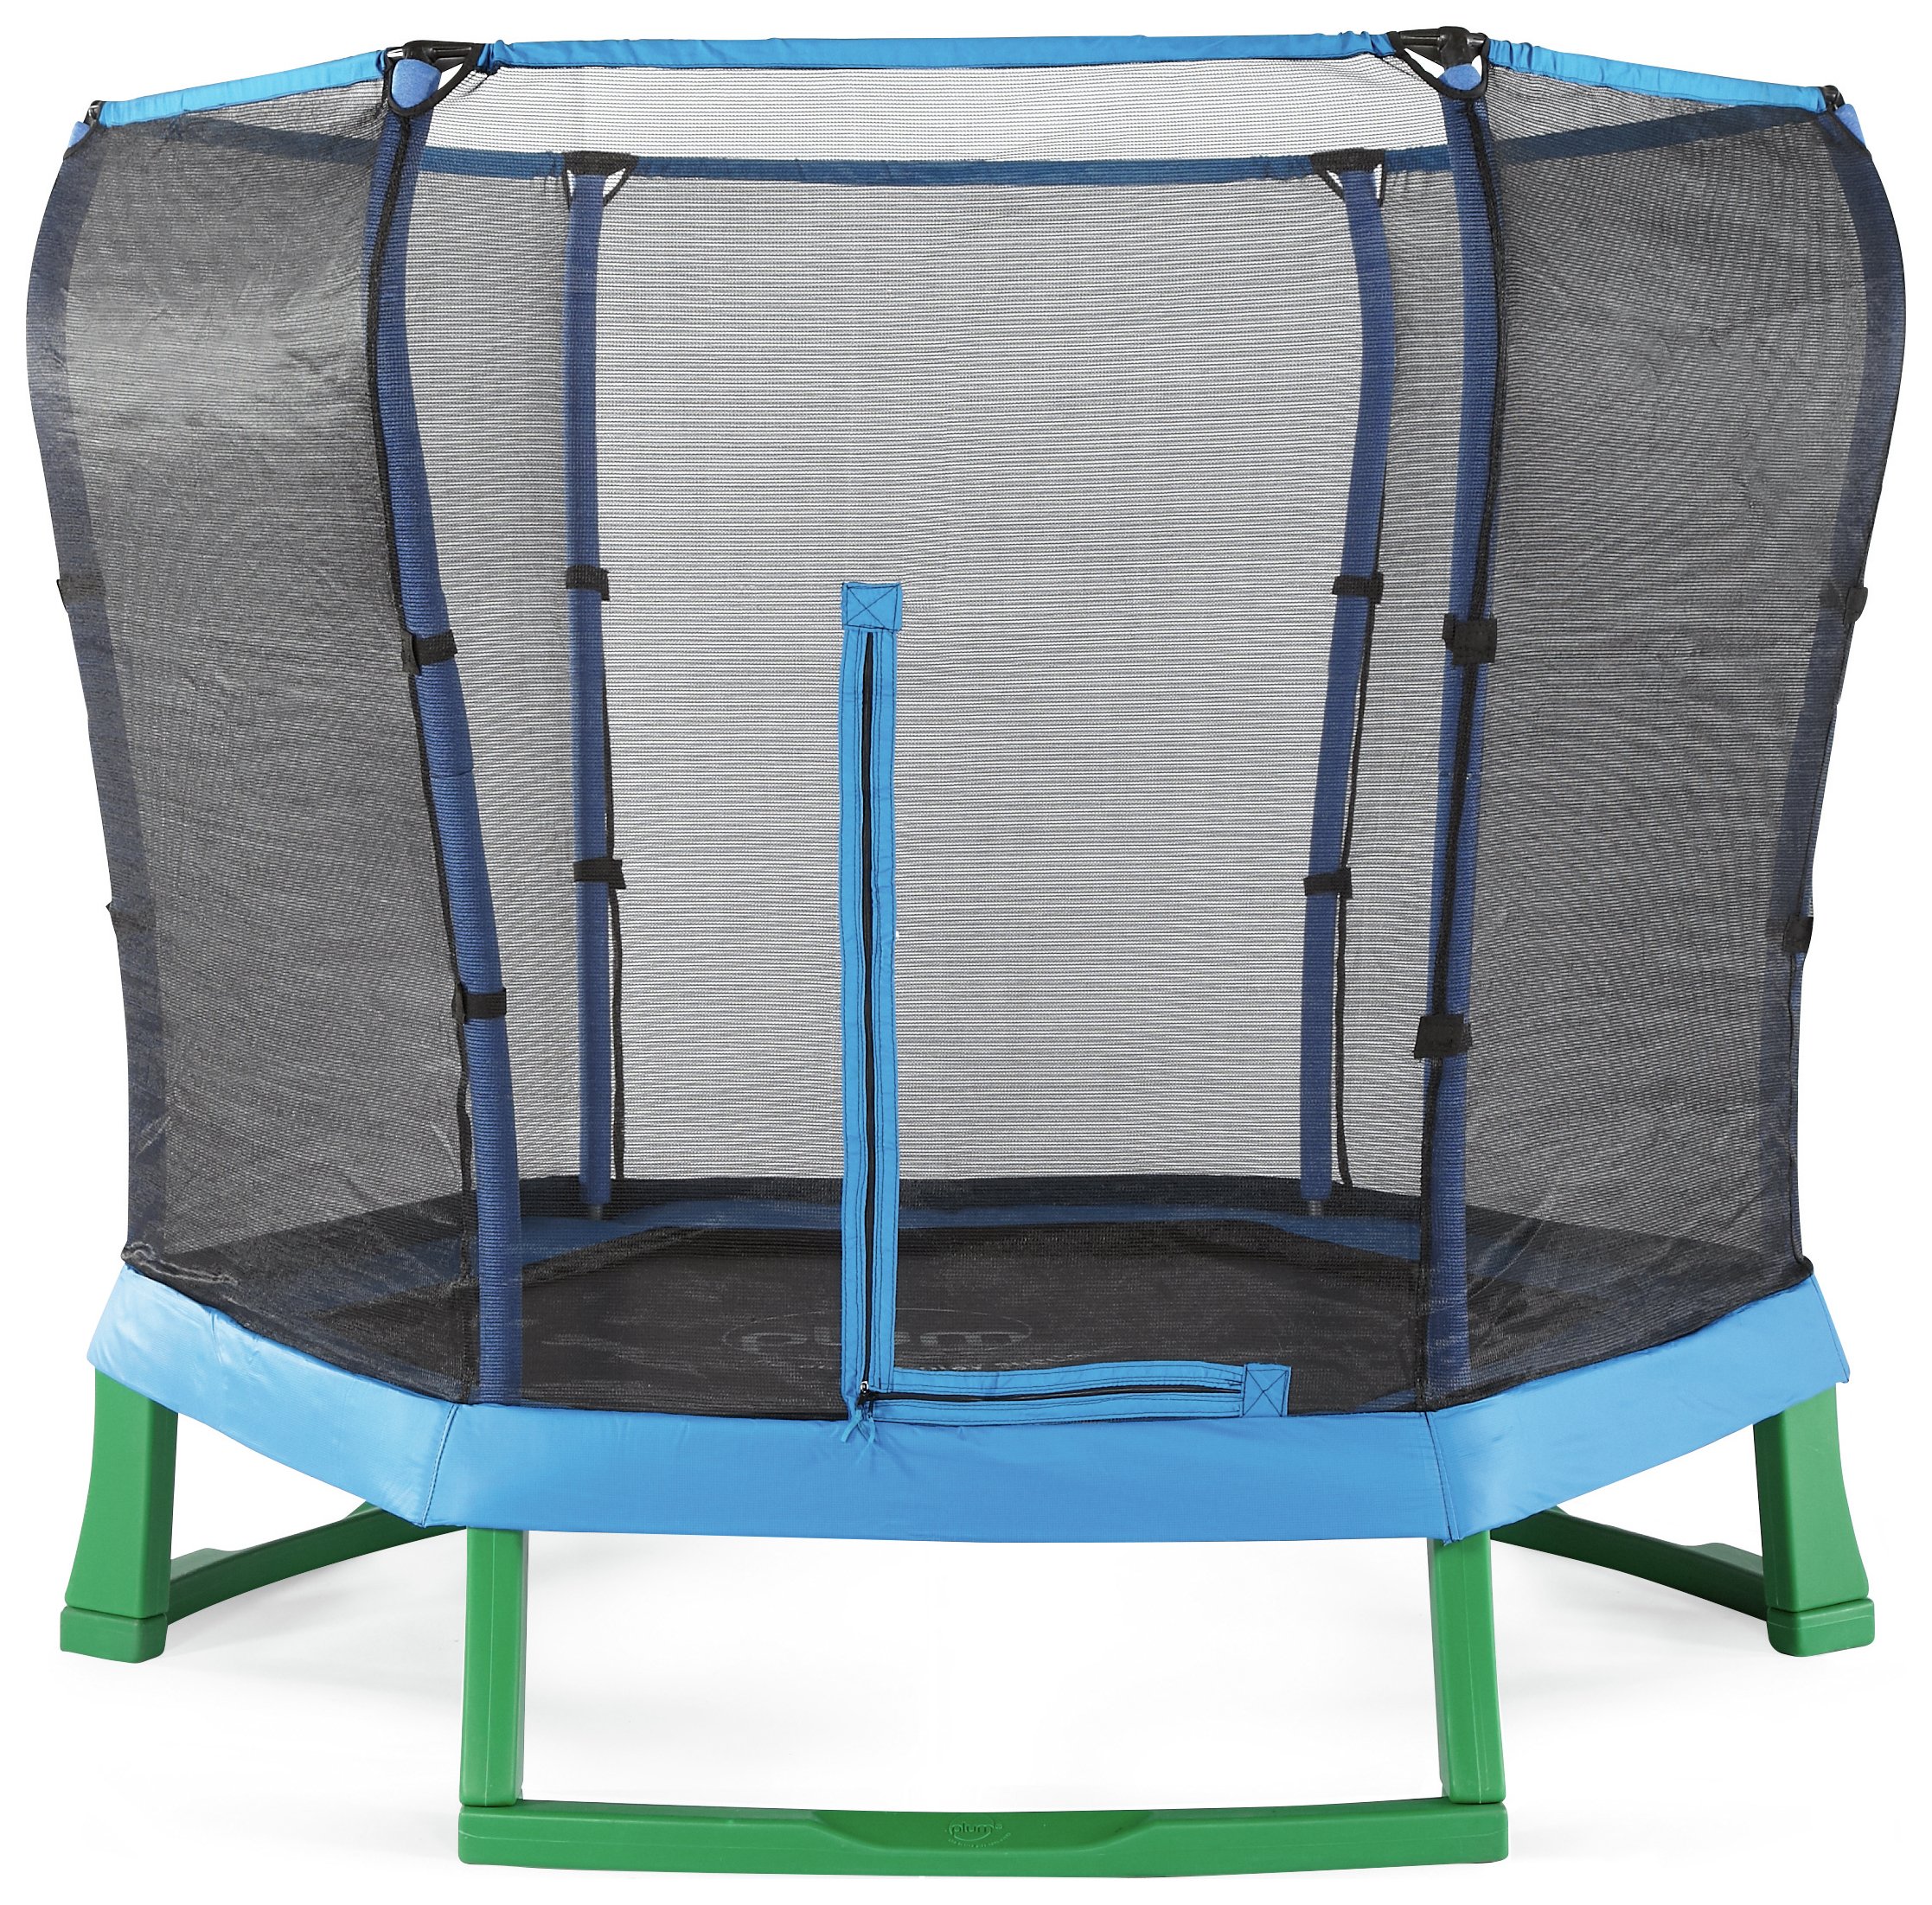 Plum Products 7ft Trampoline with Enclosure - Blue/Green